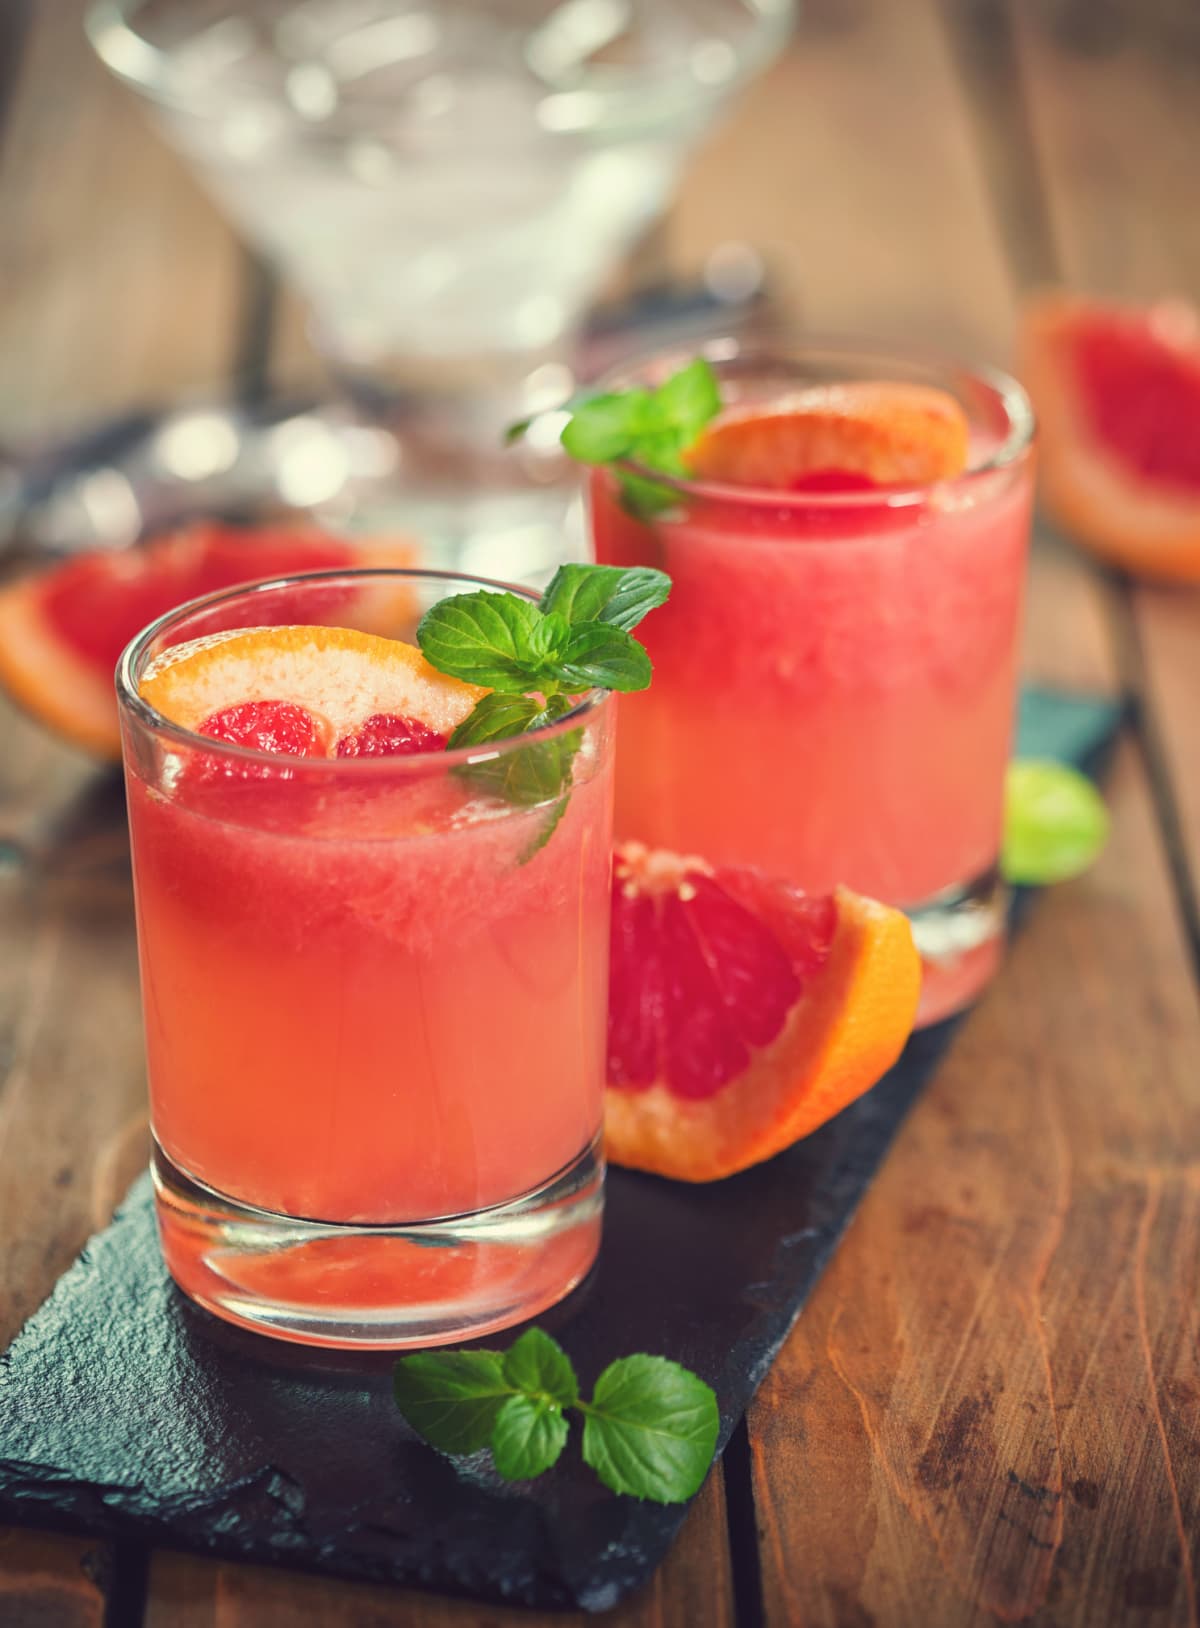 Tequila palomas cocktail with grapefruit and mint garnish